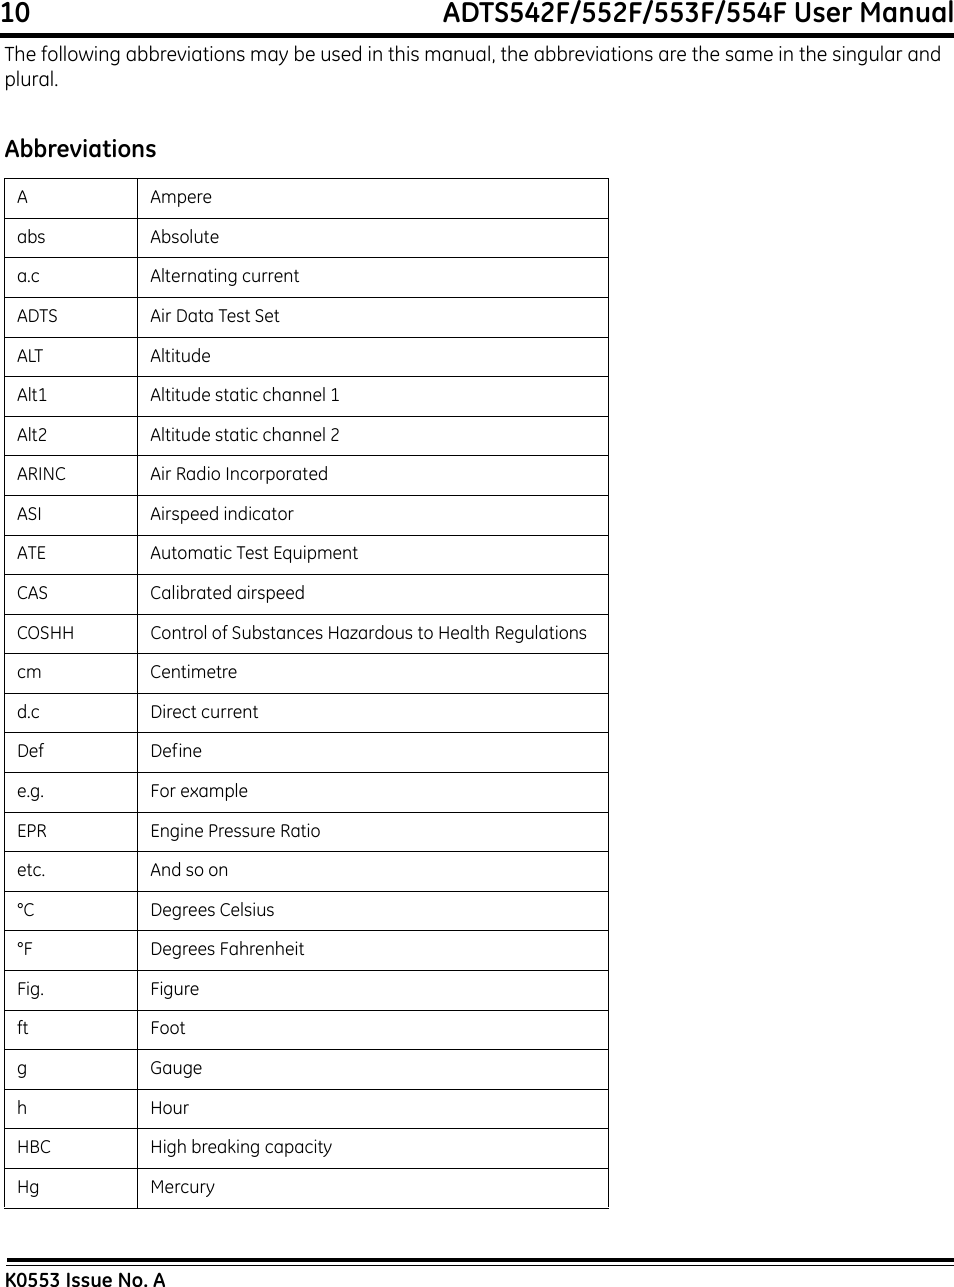 10                                                             ADTS542F/552F/553F/554F User ManualK0553 Issue No. AThe following abbreviations may be used in this manual, the abbreviations are the same in the singular and plural.AbbreviationsAAmpereabs Absolutea.c Alternating currentADTS Air Data Test SetALT AltitudeAlt1 Altitude static channel 1Alt2 Altitude static channel 2ARINC Air Radio IncorporatedASI Airspeed indicatorATE Automatic Test EquipmentCAS Calibrated airspeedCOSHH Control of Substances Hazardous to Health Regulationscm Centimetred.c Direct currentDef Definee.g. For exampleEPR Engine Pressure Ratioetc. And so on°C Degrees Celsius°F Degrees FahrenheitFig. Figureft Footg GaugehHourHBC High breaking capacityHg Mercury